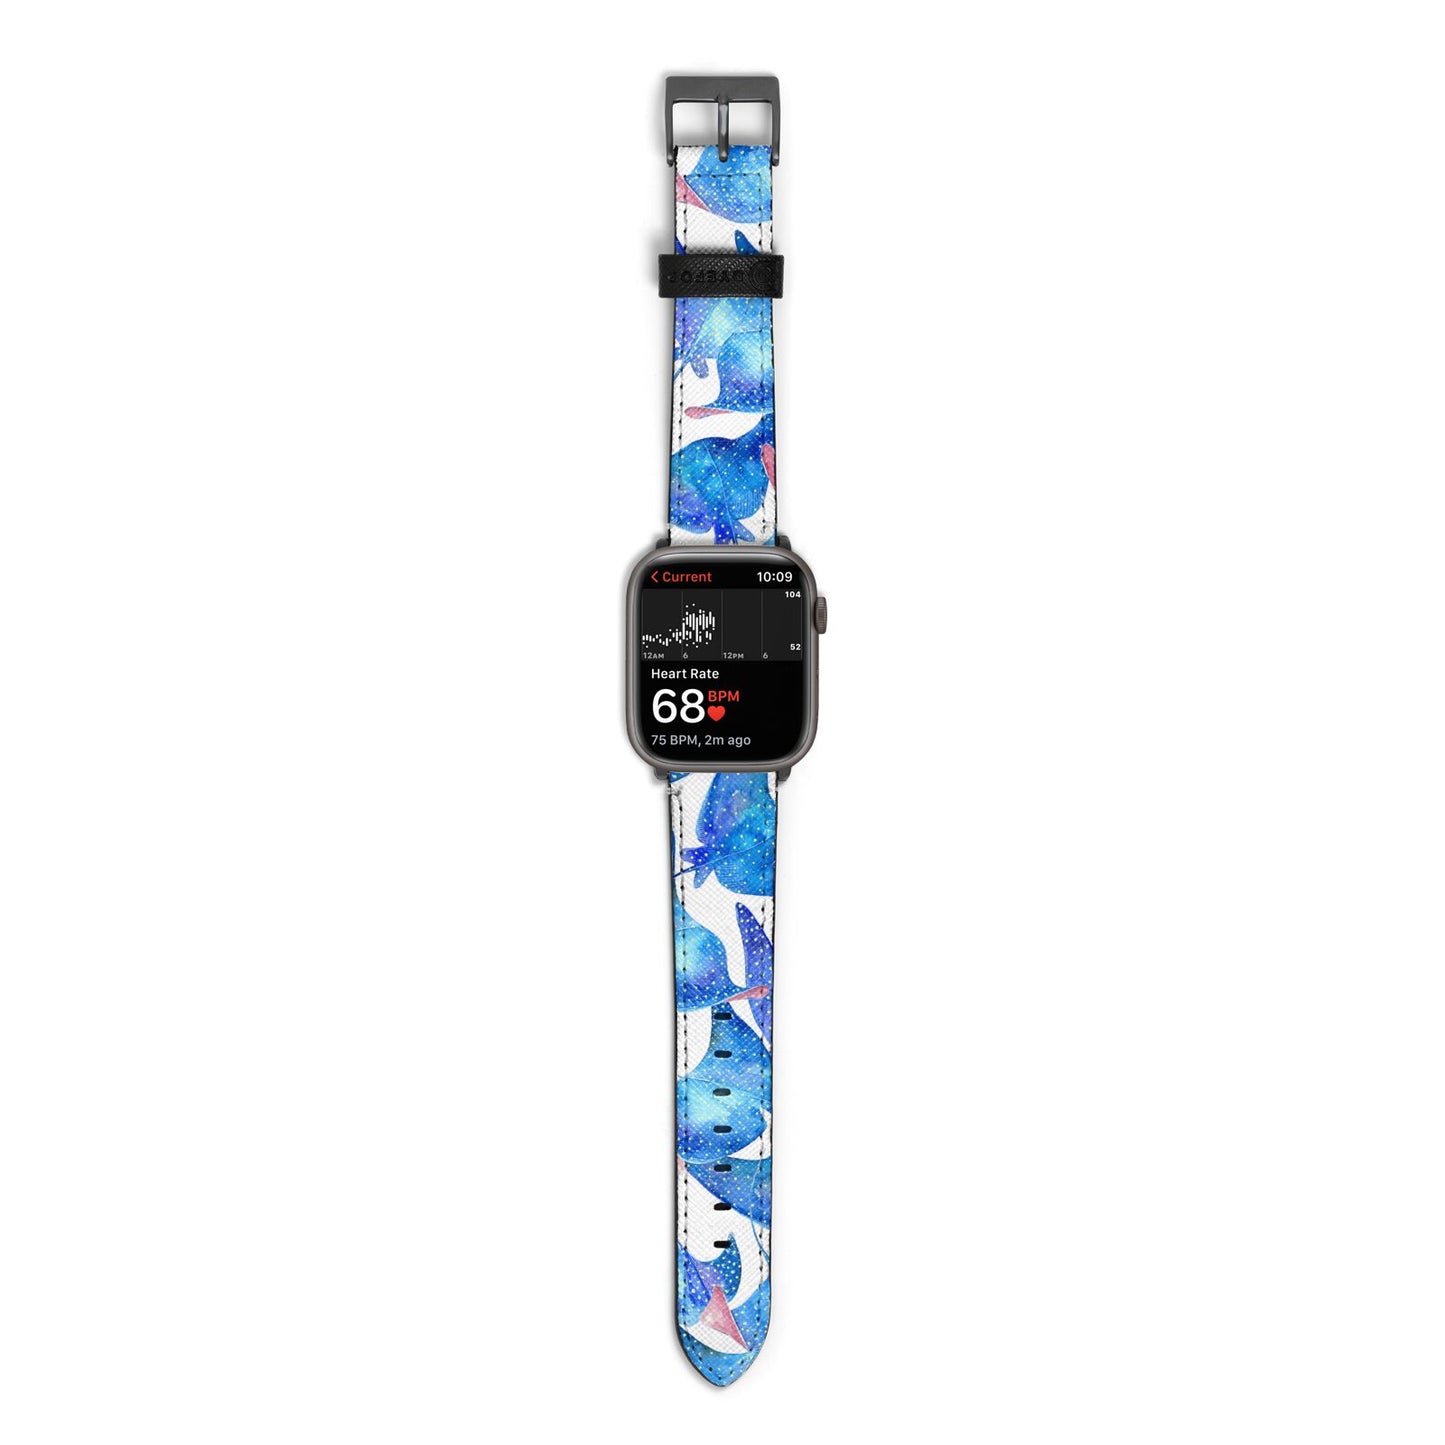 Devil Fish Apple Watch Strap Size 38mm with Space Grey Hardware